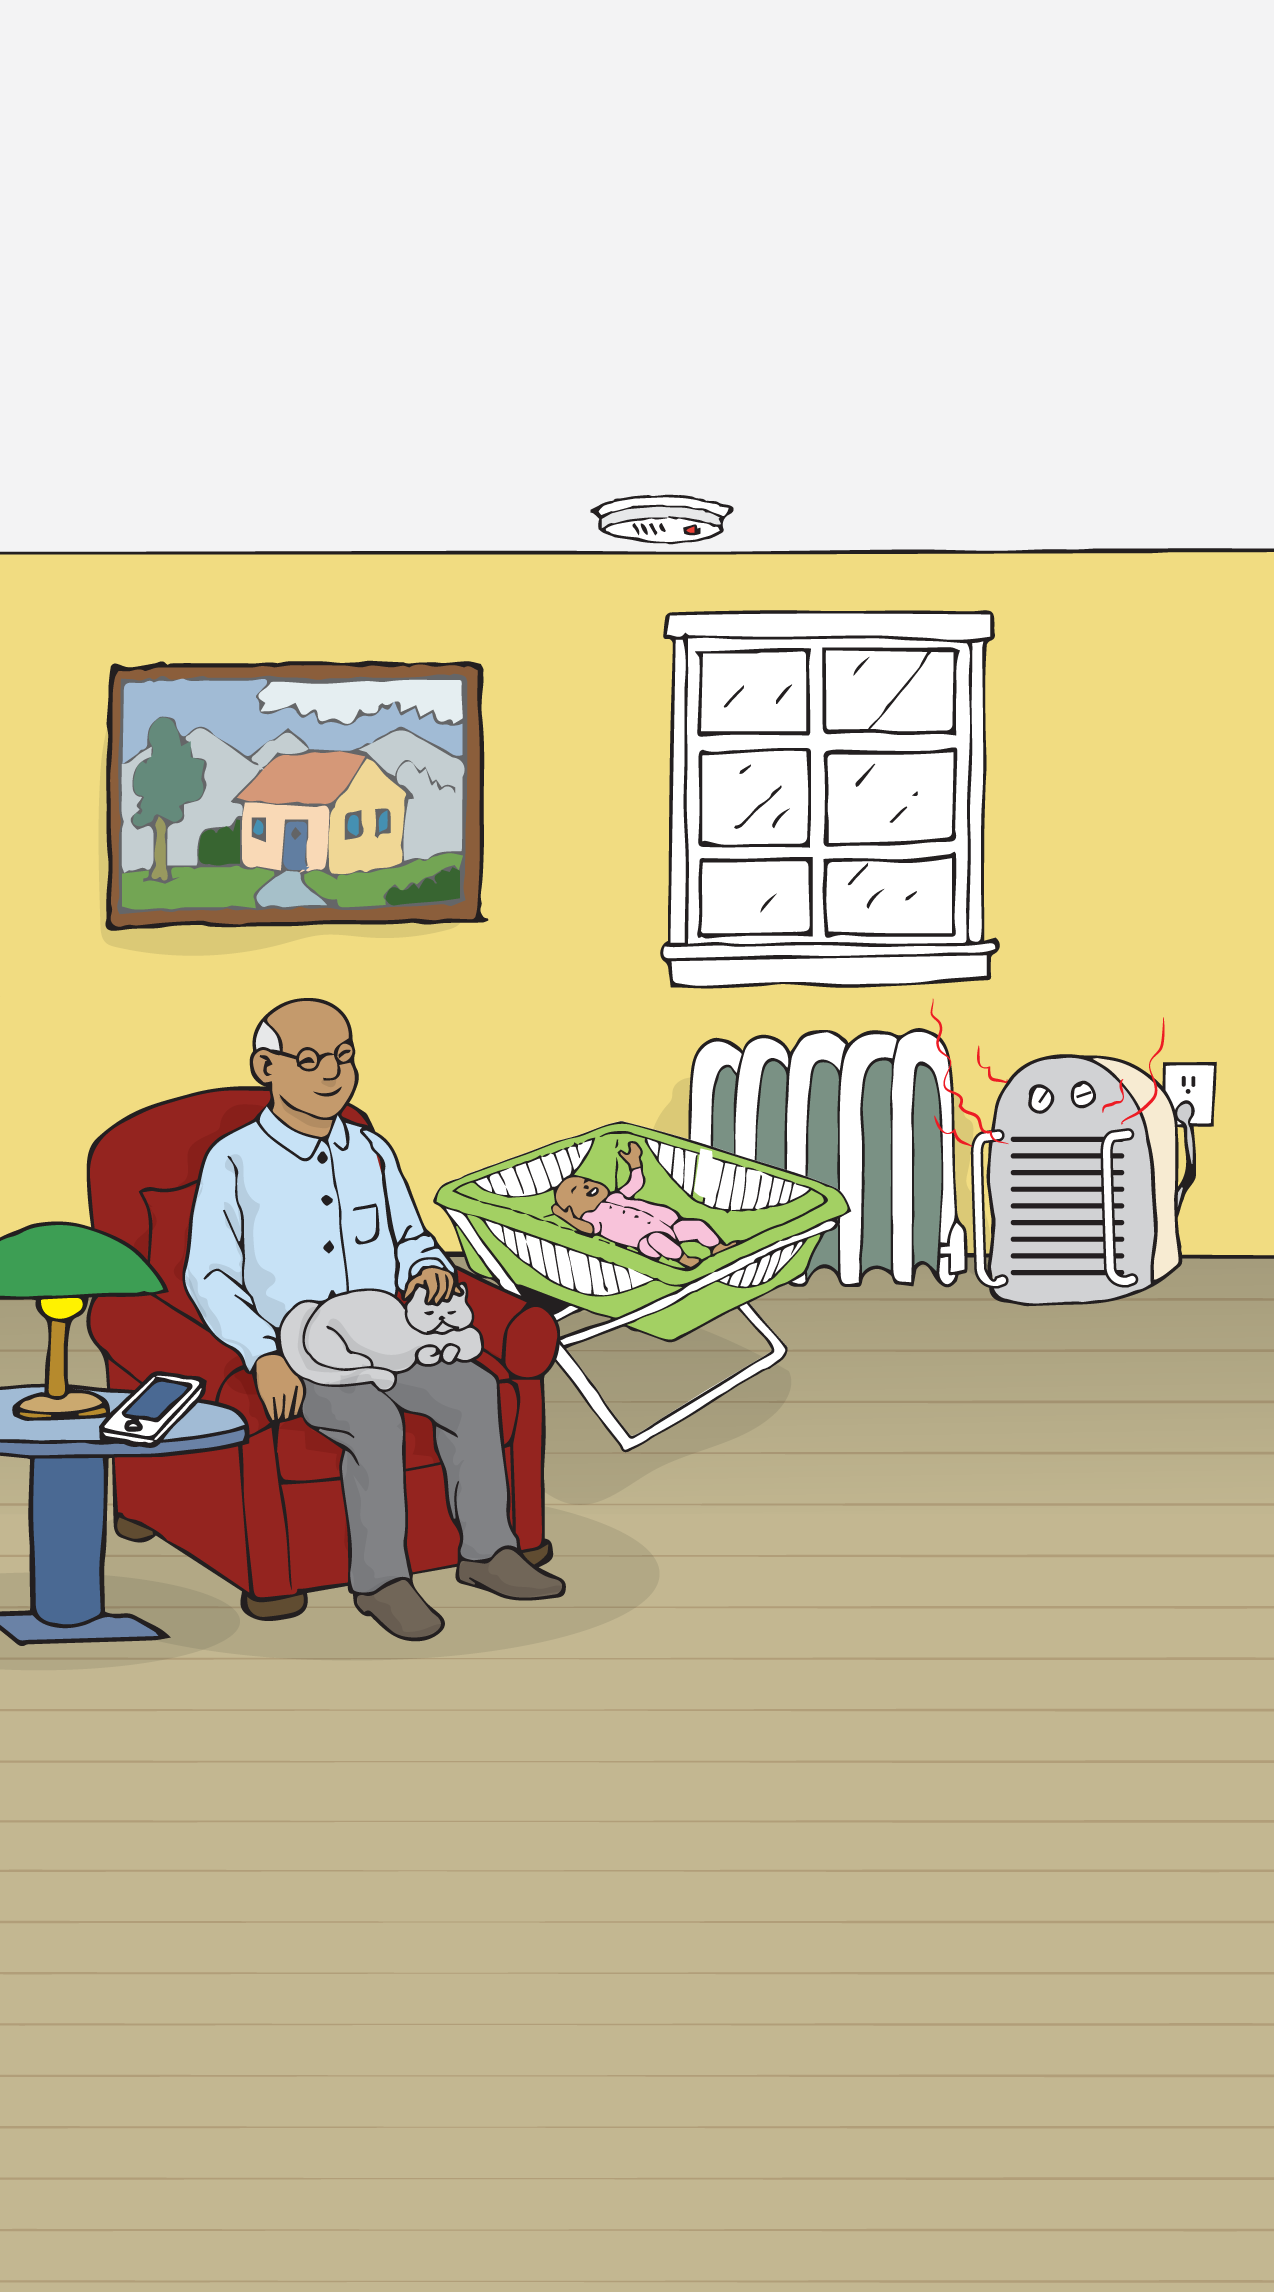 An older man is sitting on a red sofa chair in the middle of a room with a cat on his lap. On his left-hand side there is a crib with a baby in it. On his right-hand side there is a small table with a lamp and a cell phone on it. There is a window in the middle of the room, next to a painting of a house. It is snowing outside. There is a radiator under the window, with a space heater next to it. The space heater is plugged into an outlet and turned on. There is a dinner table on the right side of the room. There is a smoke alarm on the ceiling. There are five snowflake icons that can be clicked on for information. They are located next to the cell phone, the baby’s crib, the radiator, the space heater and the smoke alarm.